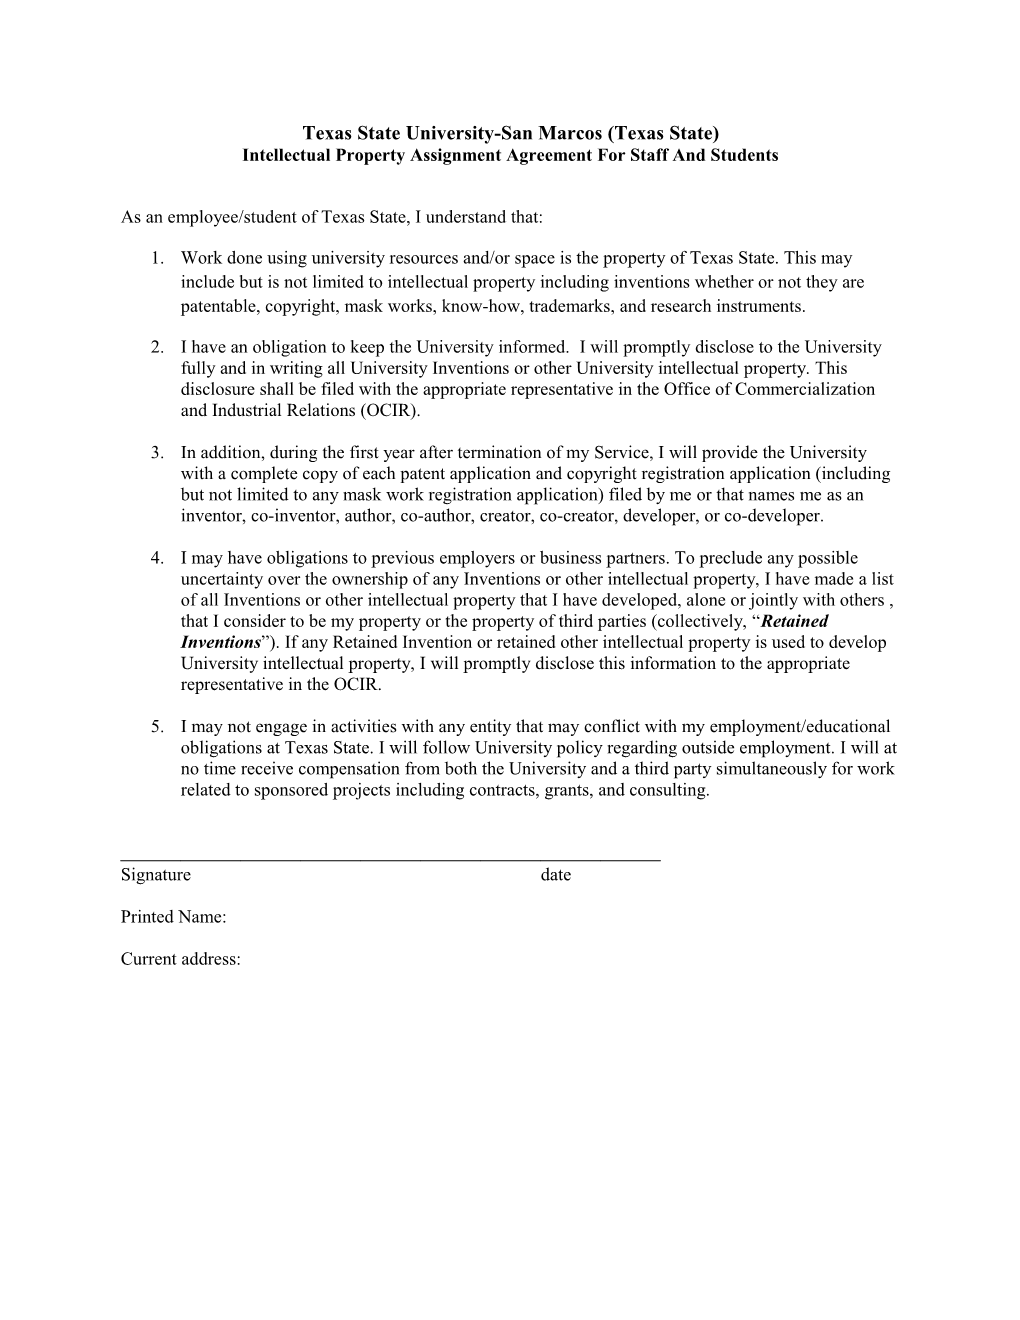 Intellectual Property Assignment Agreement for Staff and Students